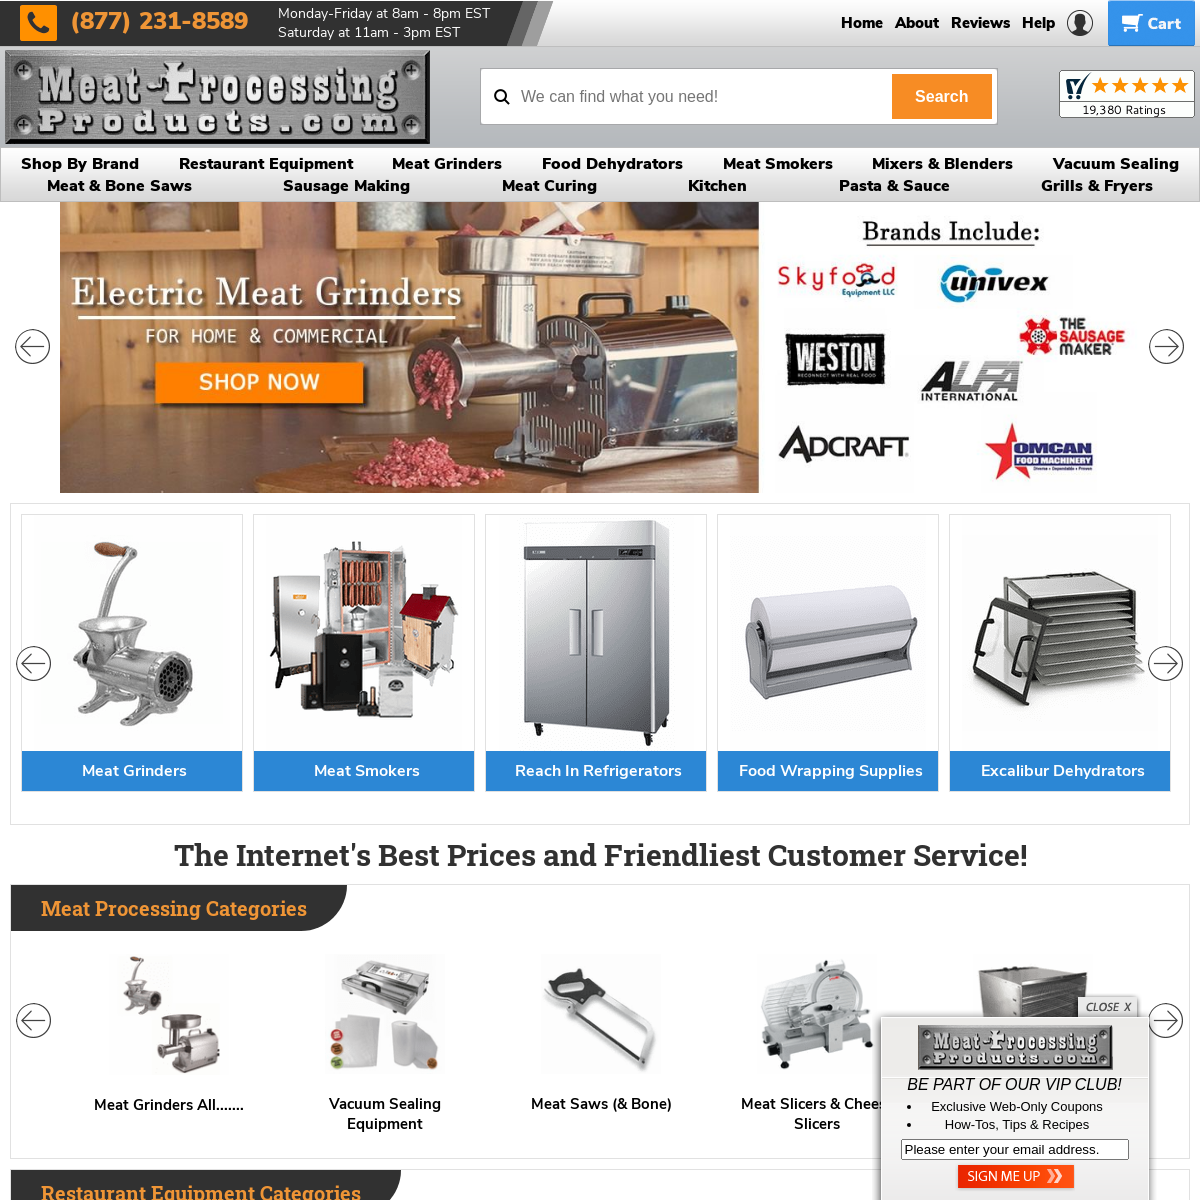 A complete backup of meatprocessingproducts.com